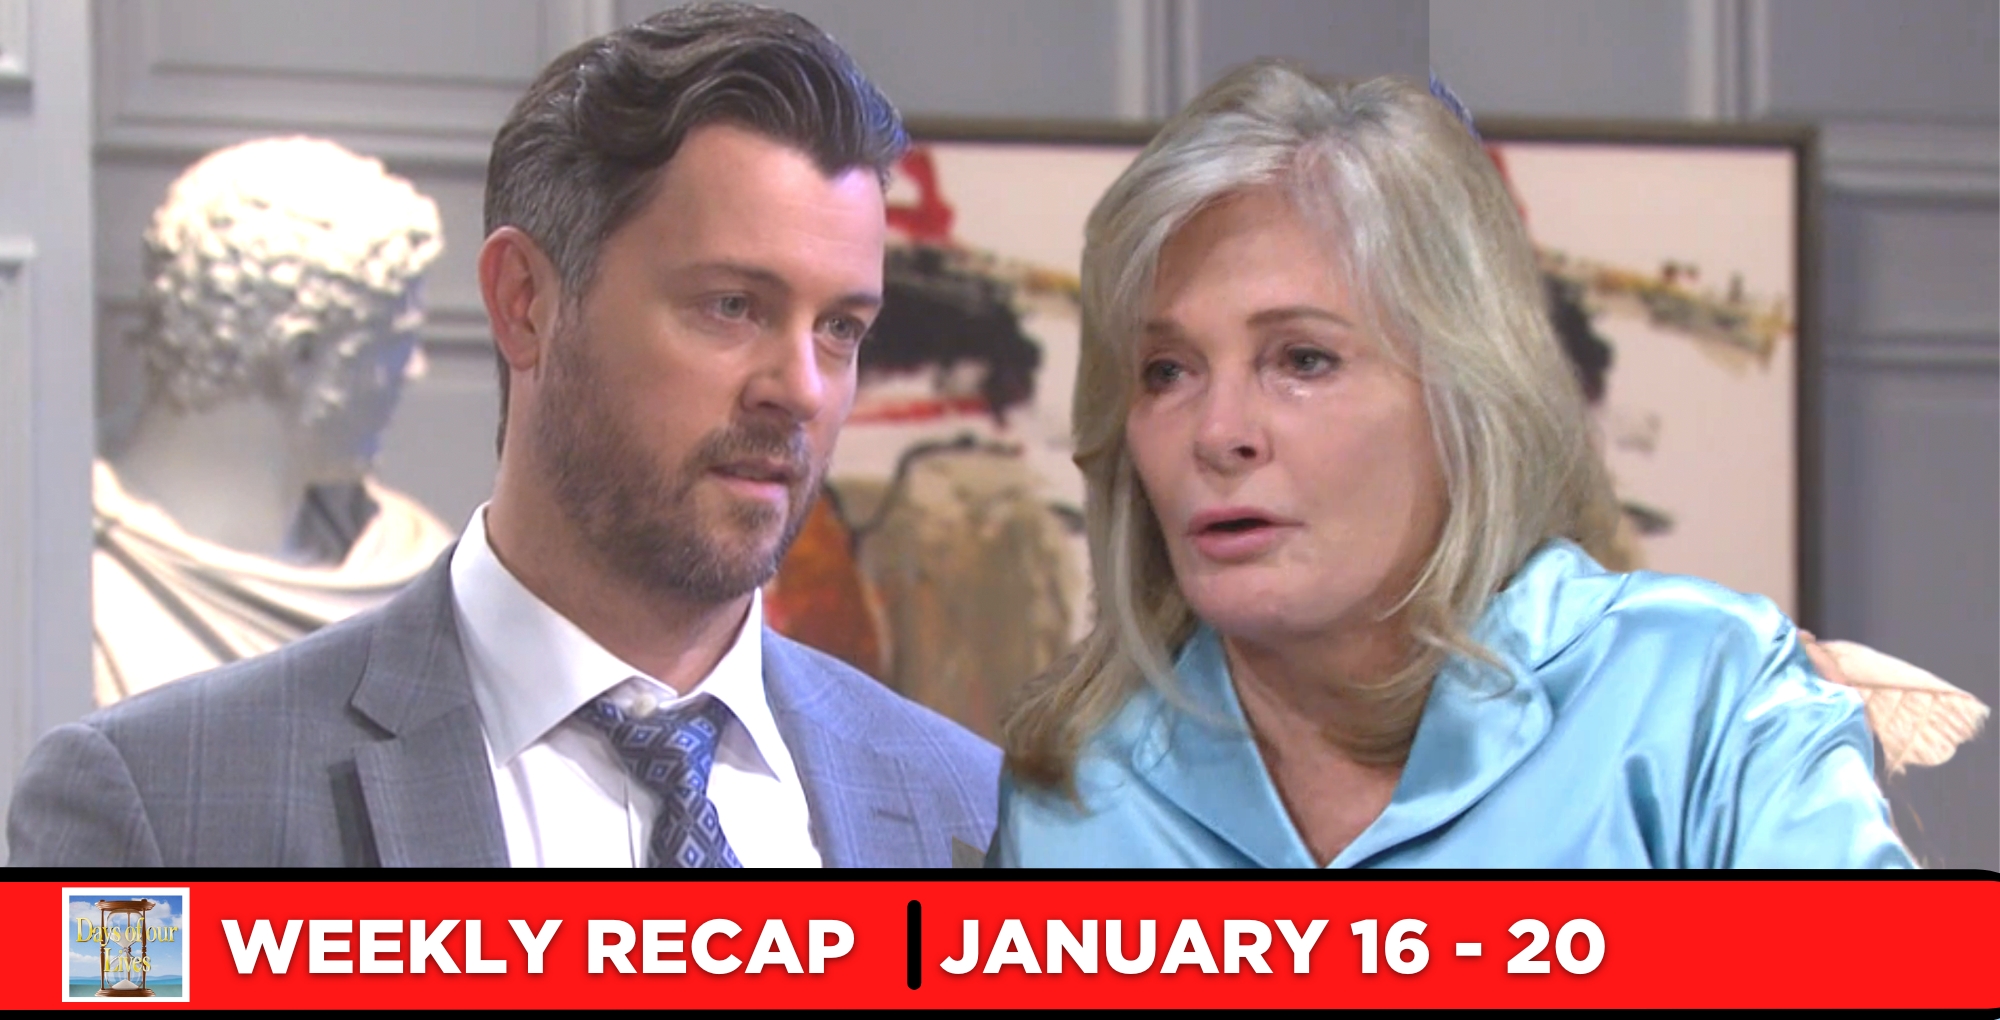 days of our lives recaps ej dimera in a suit and marlena evans